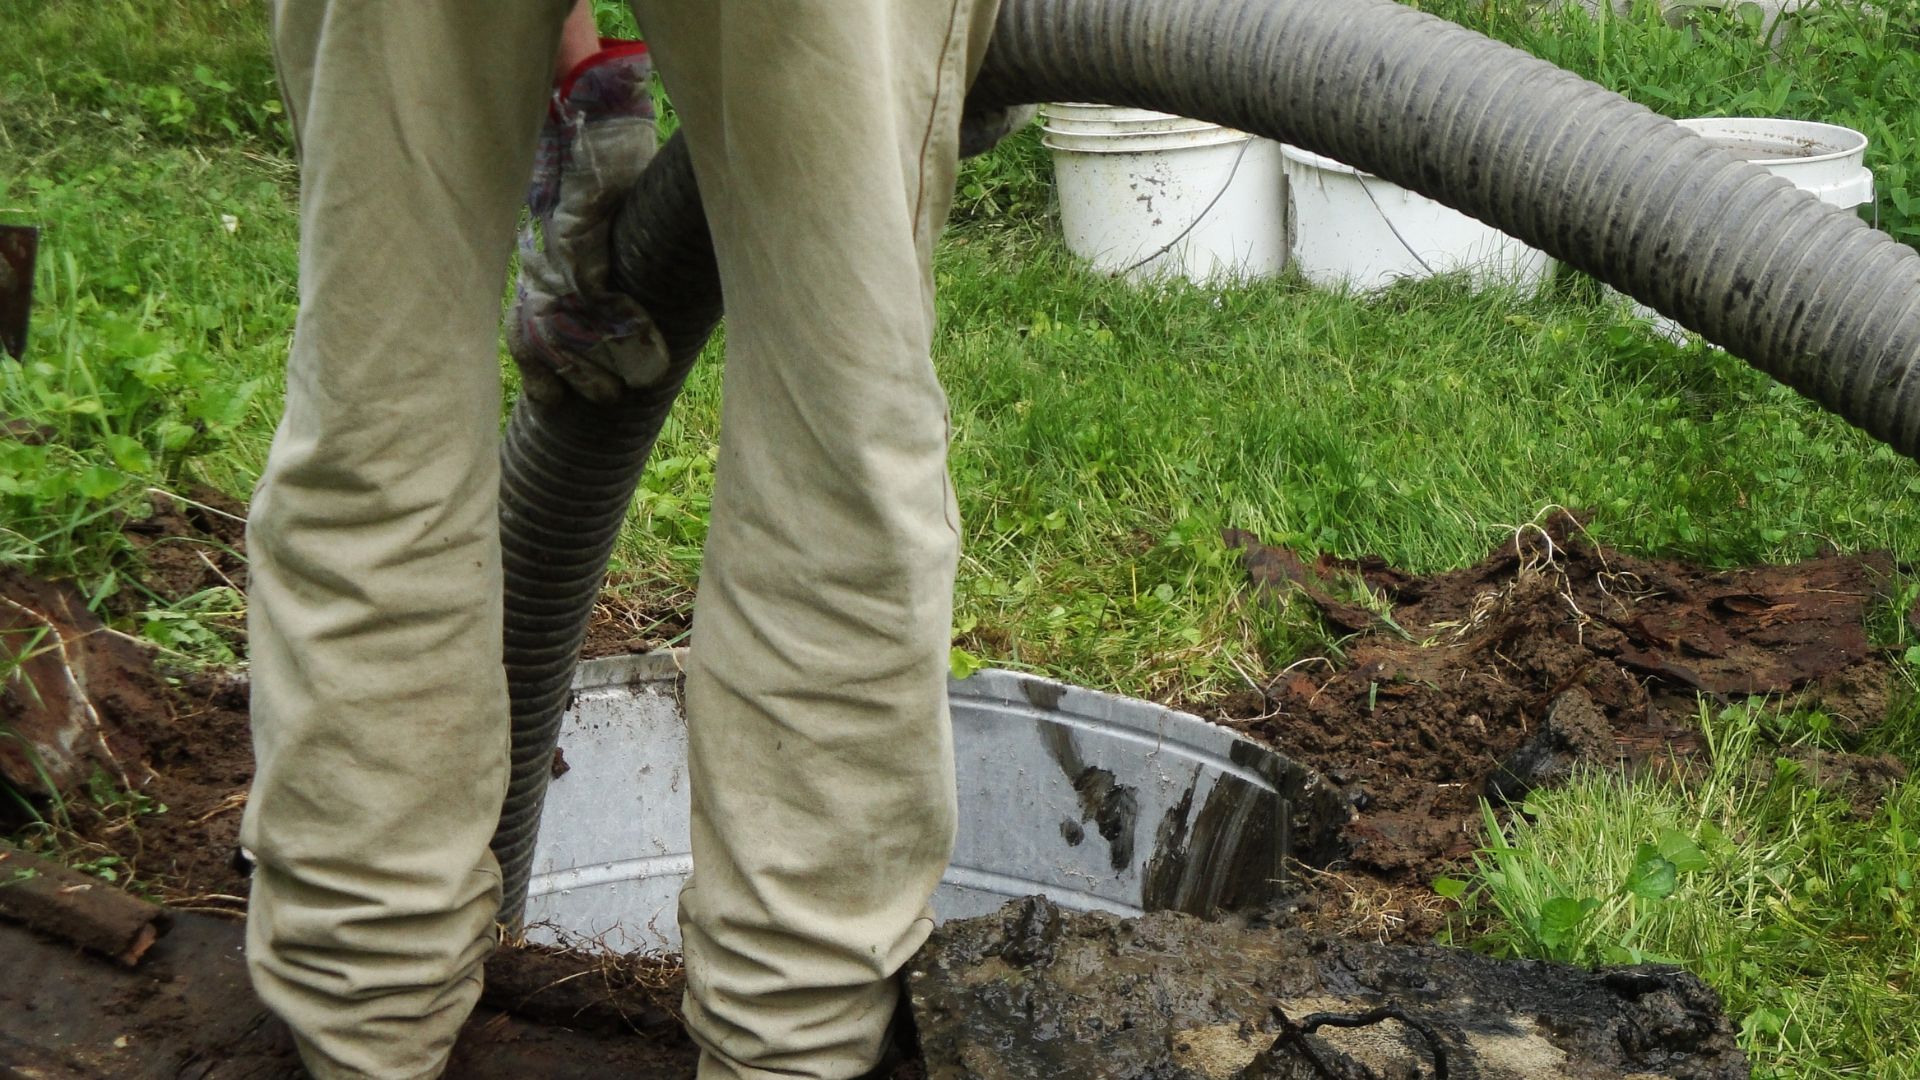 The Health Hazards Of Leaking Sewage: How Professional Remediation Can Help